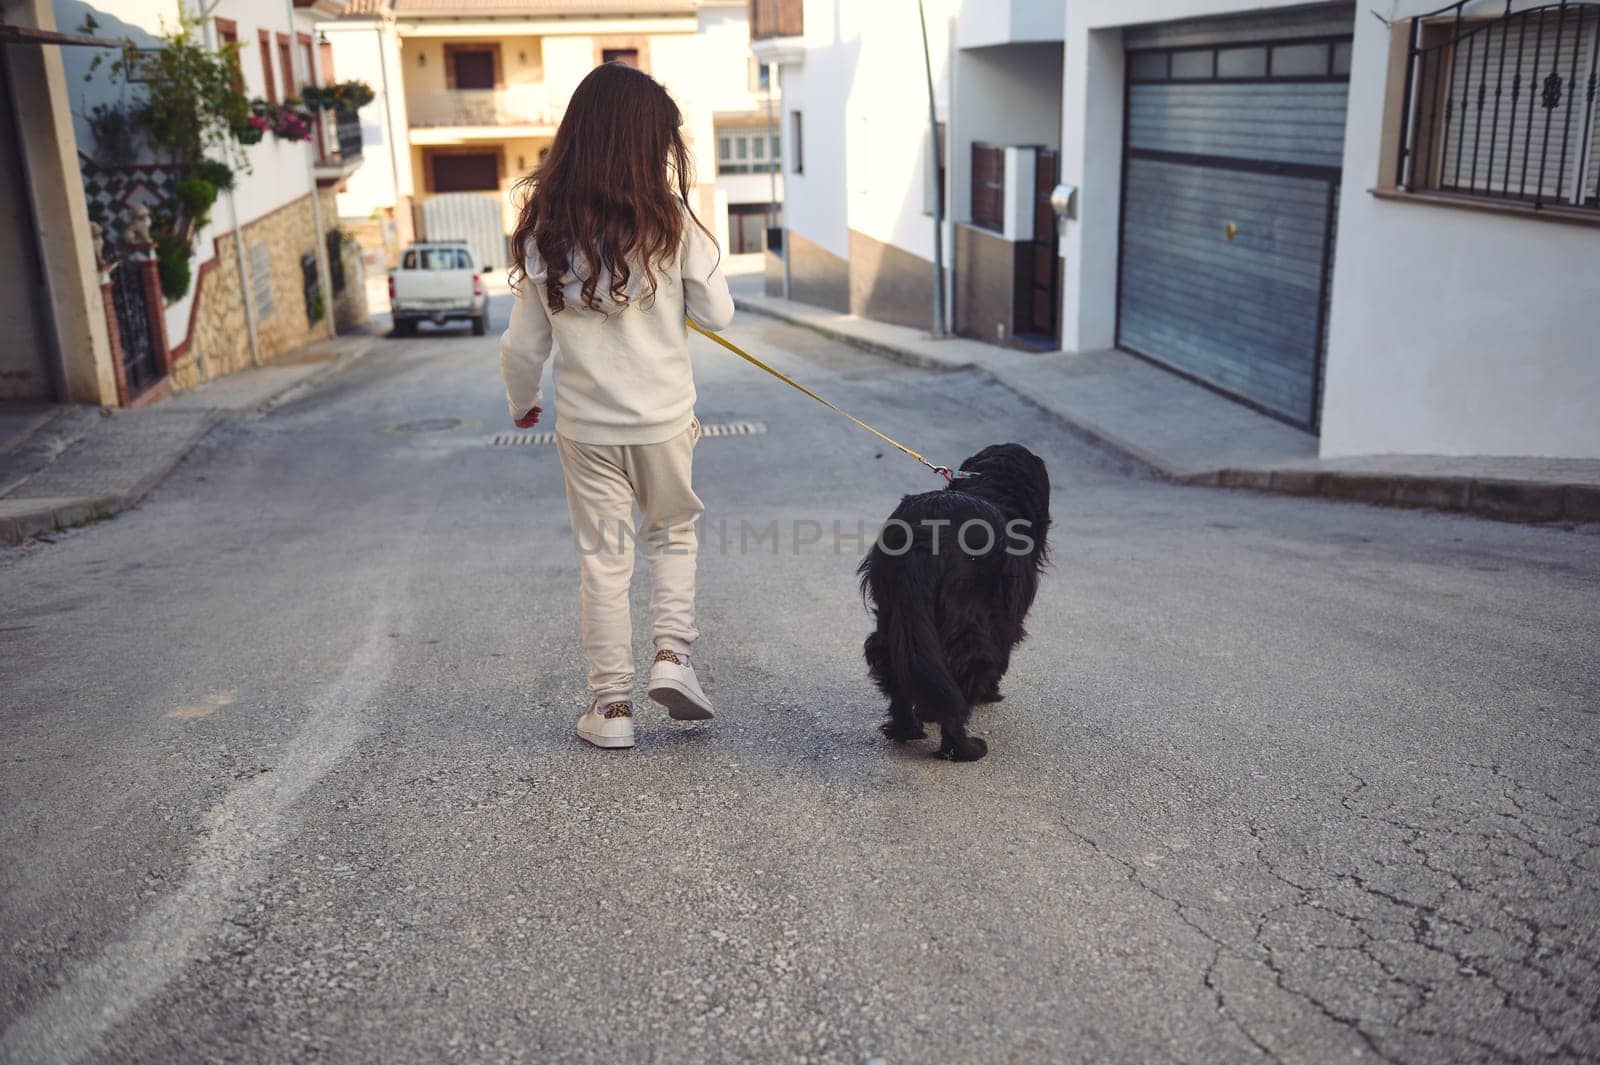 Rear view of a pretty girl walking her dog on leash on the street on sunny day. Black cocker spaniel pet being walked outdoors. People and animals concept by artgf